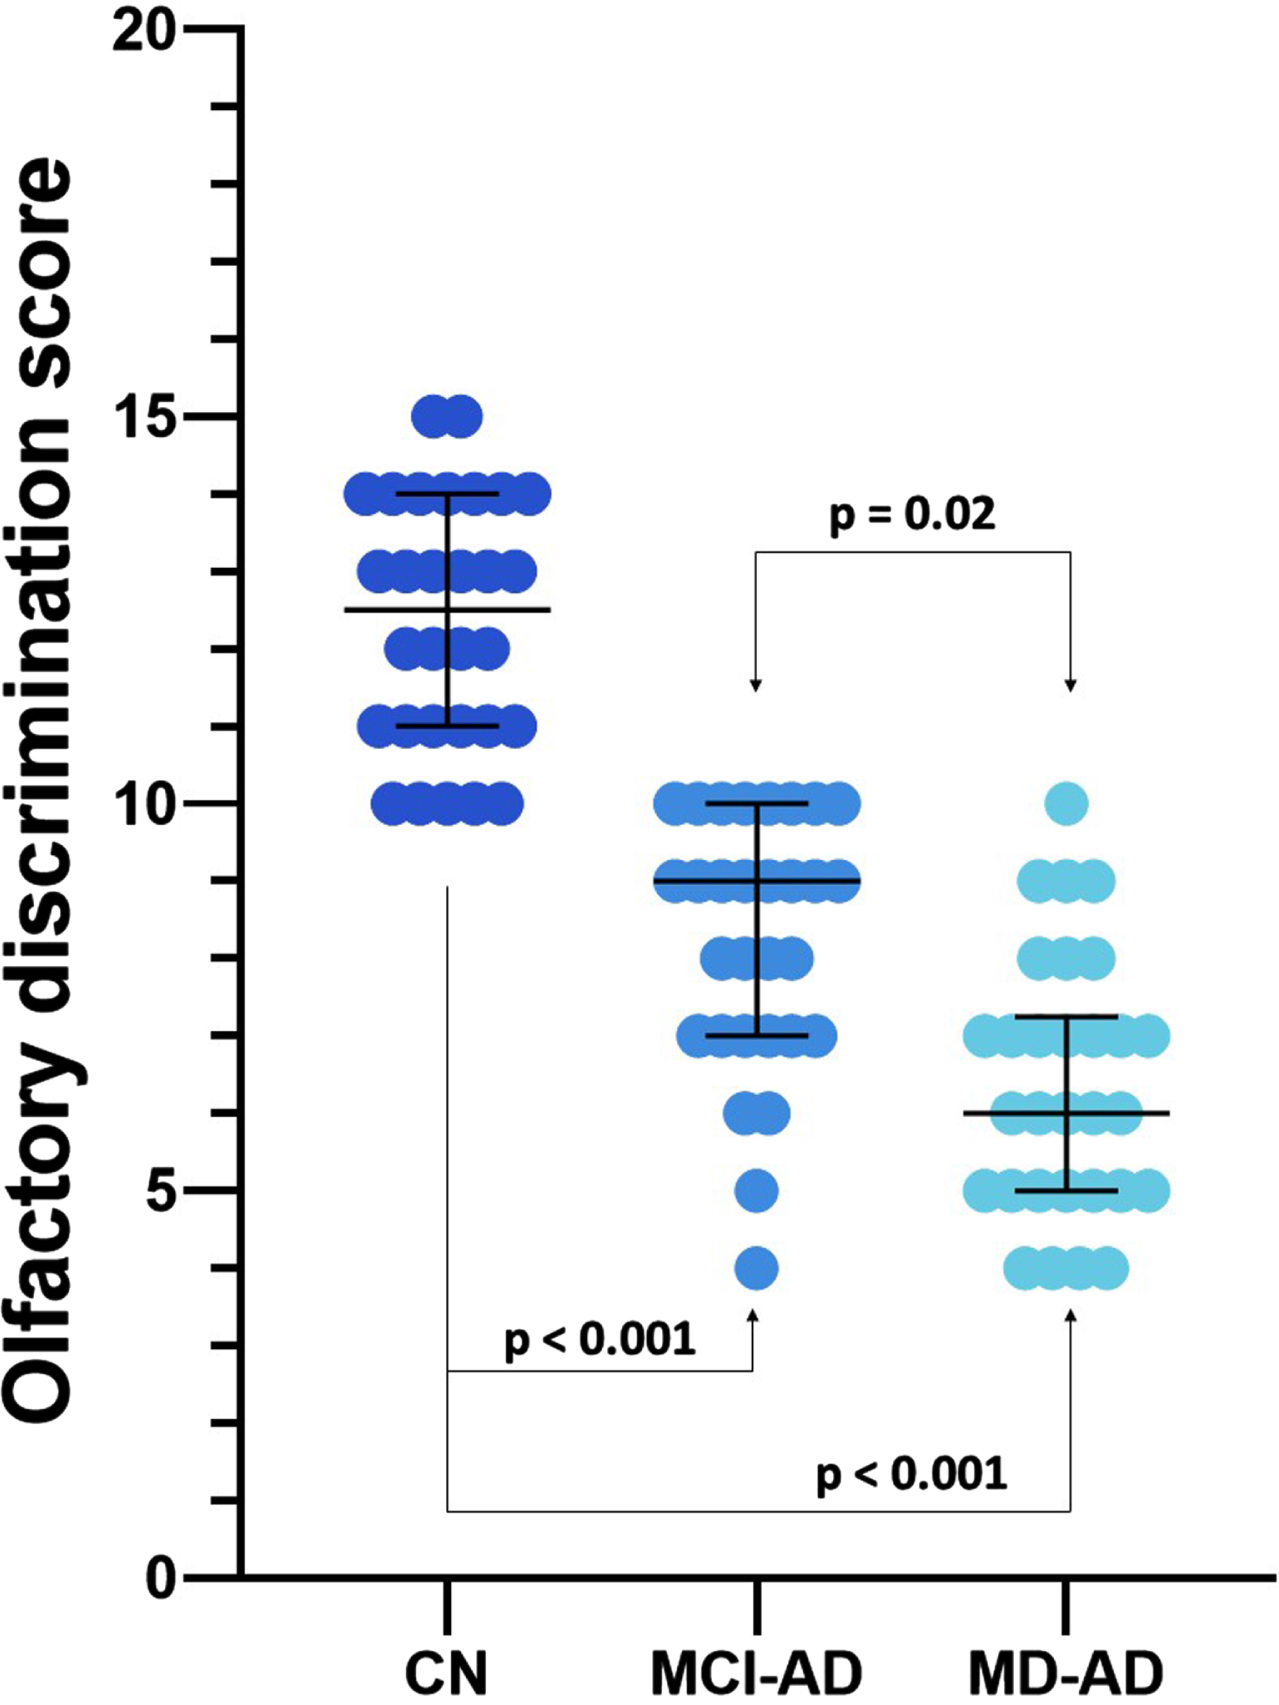 Olfactory discrimination scores of the three groups. Lines represent medians, error bars represent Interquartile ranges, and dots represent individual data points. MD-AD, mild dementia due to Alzheimer’s disease; MCI-AD, mild cognitive impairment due to Alzheimer’s disease; CN, normal cognition.